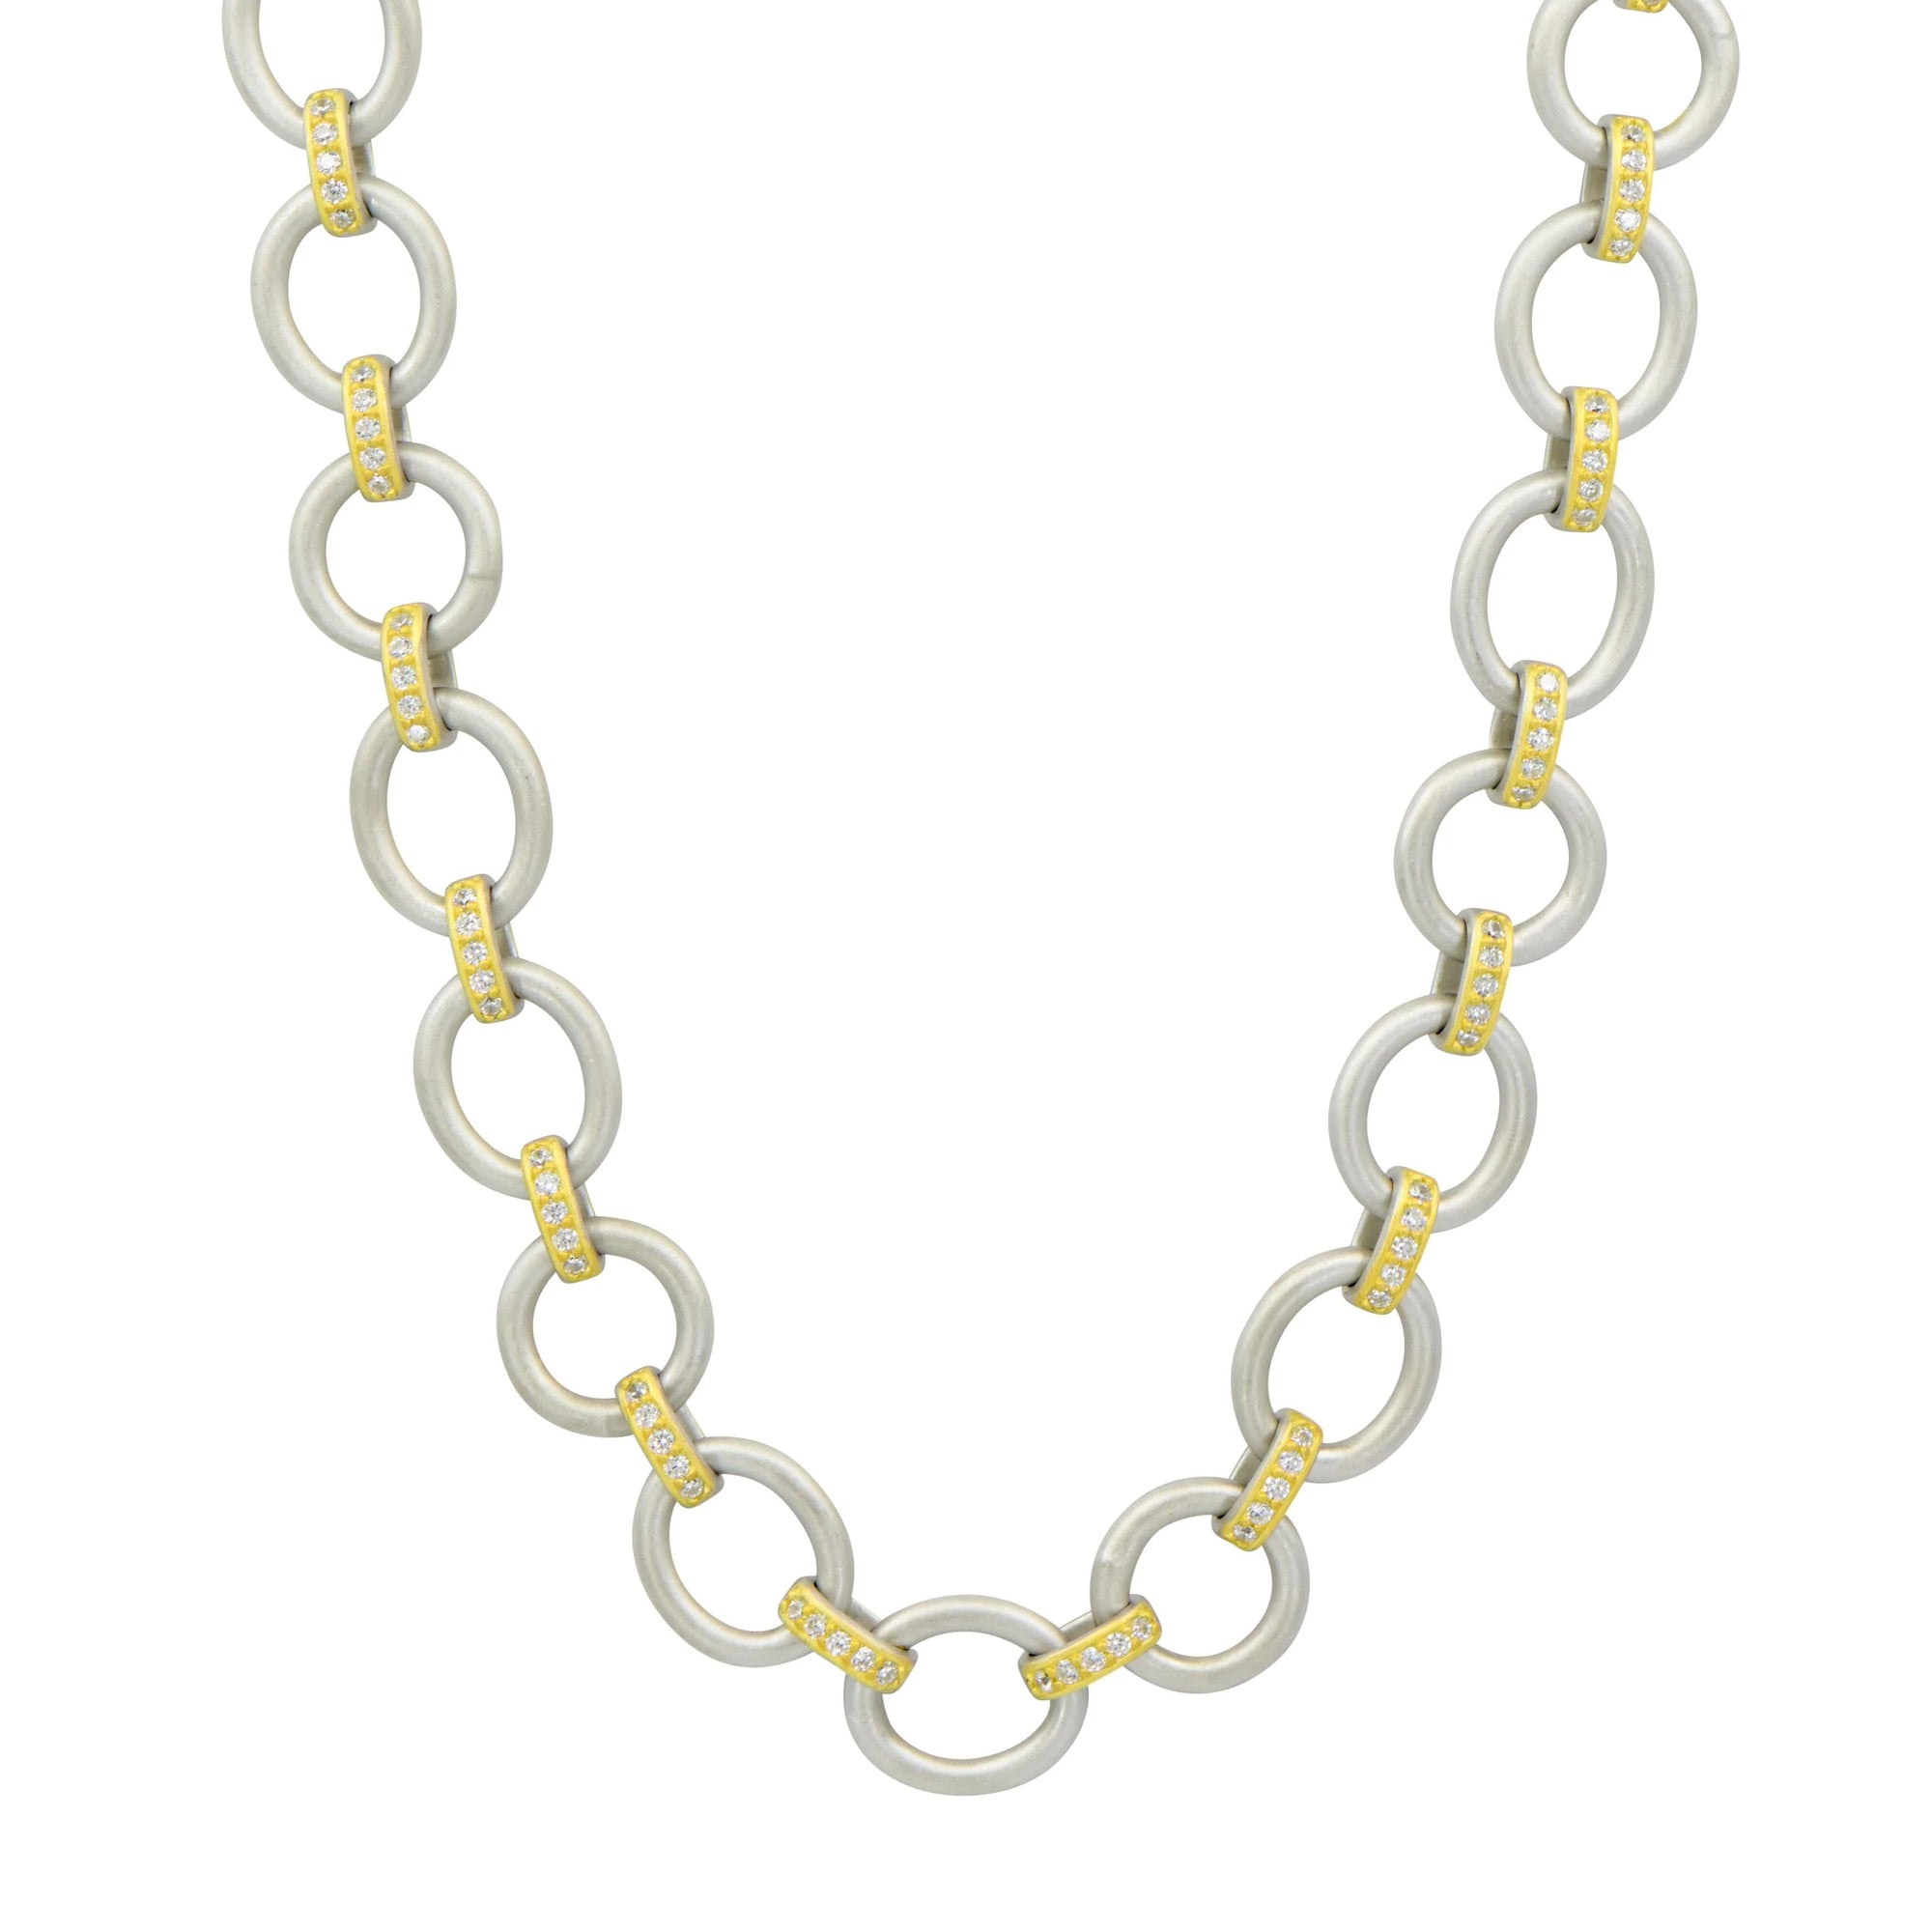 Freida Rothman "The Perfect Chunky Mixed Metal Link Necklace"